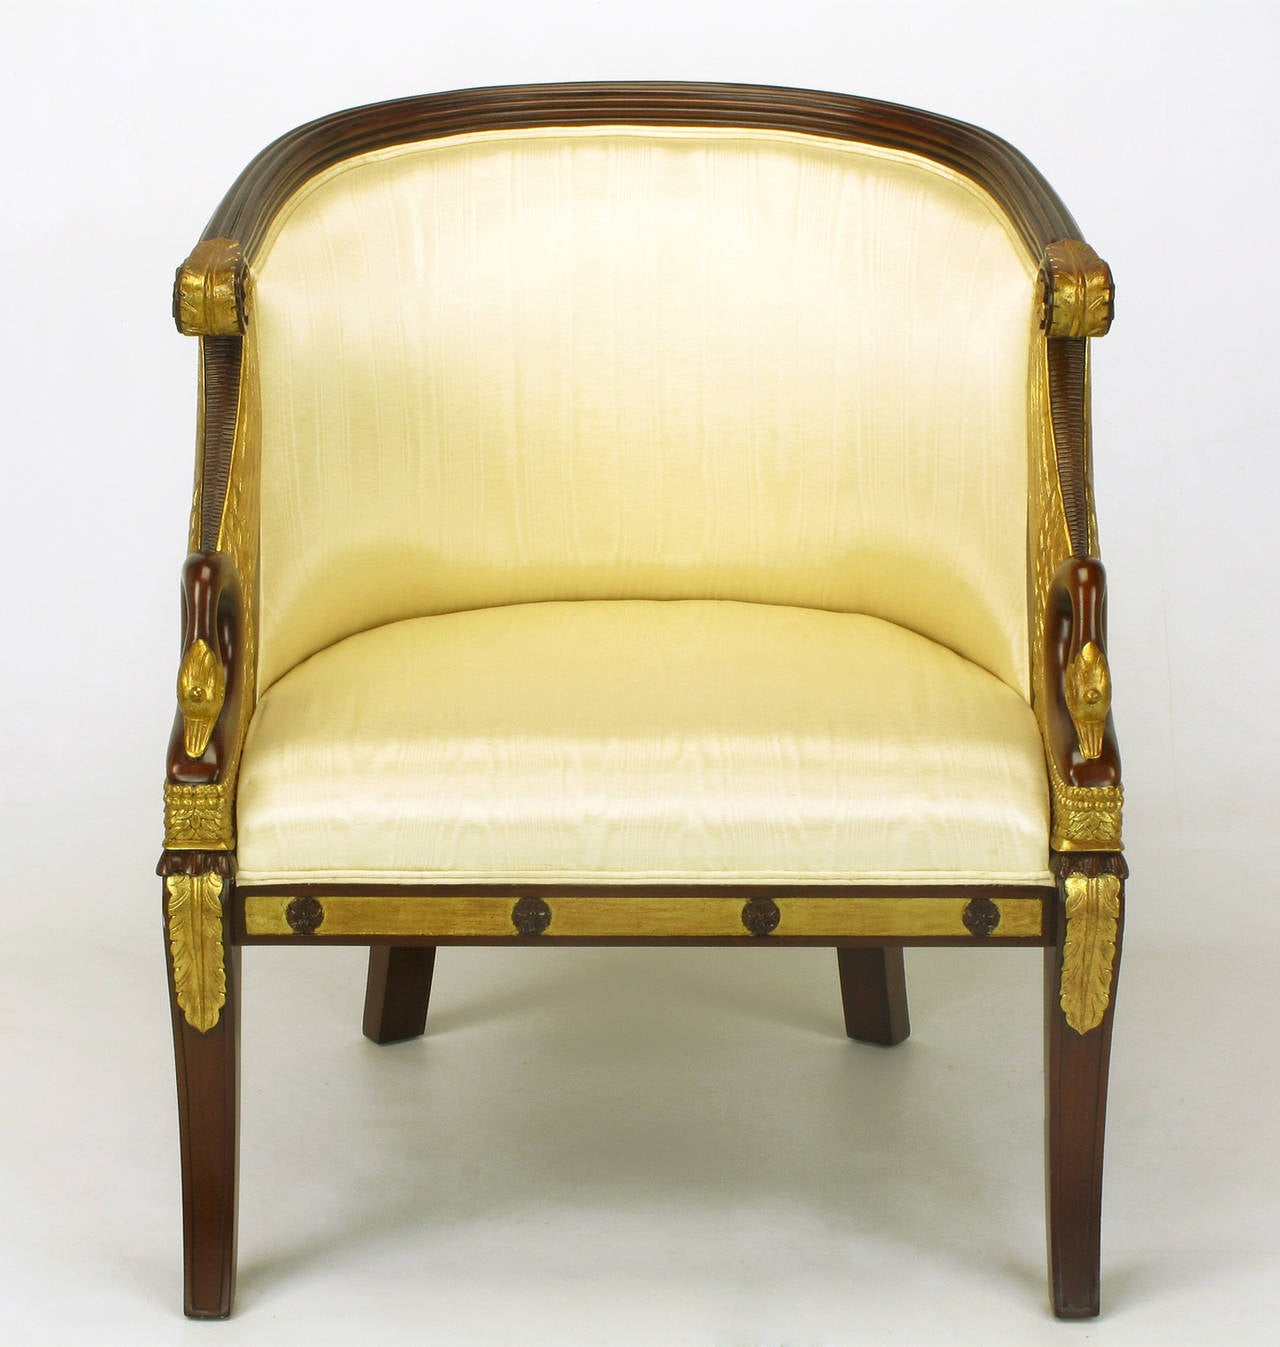 Indonesian Pair of Maitland Smith Empire Revival Mahogany and Parcel-Gilt Swan Bergeres